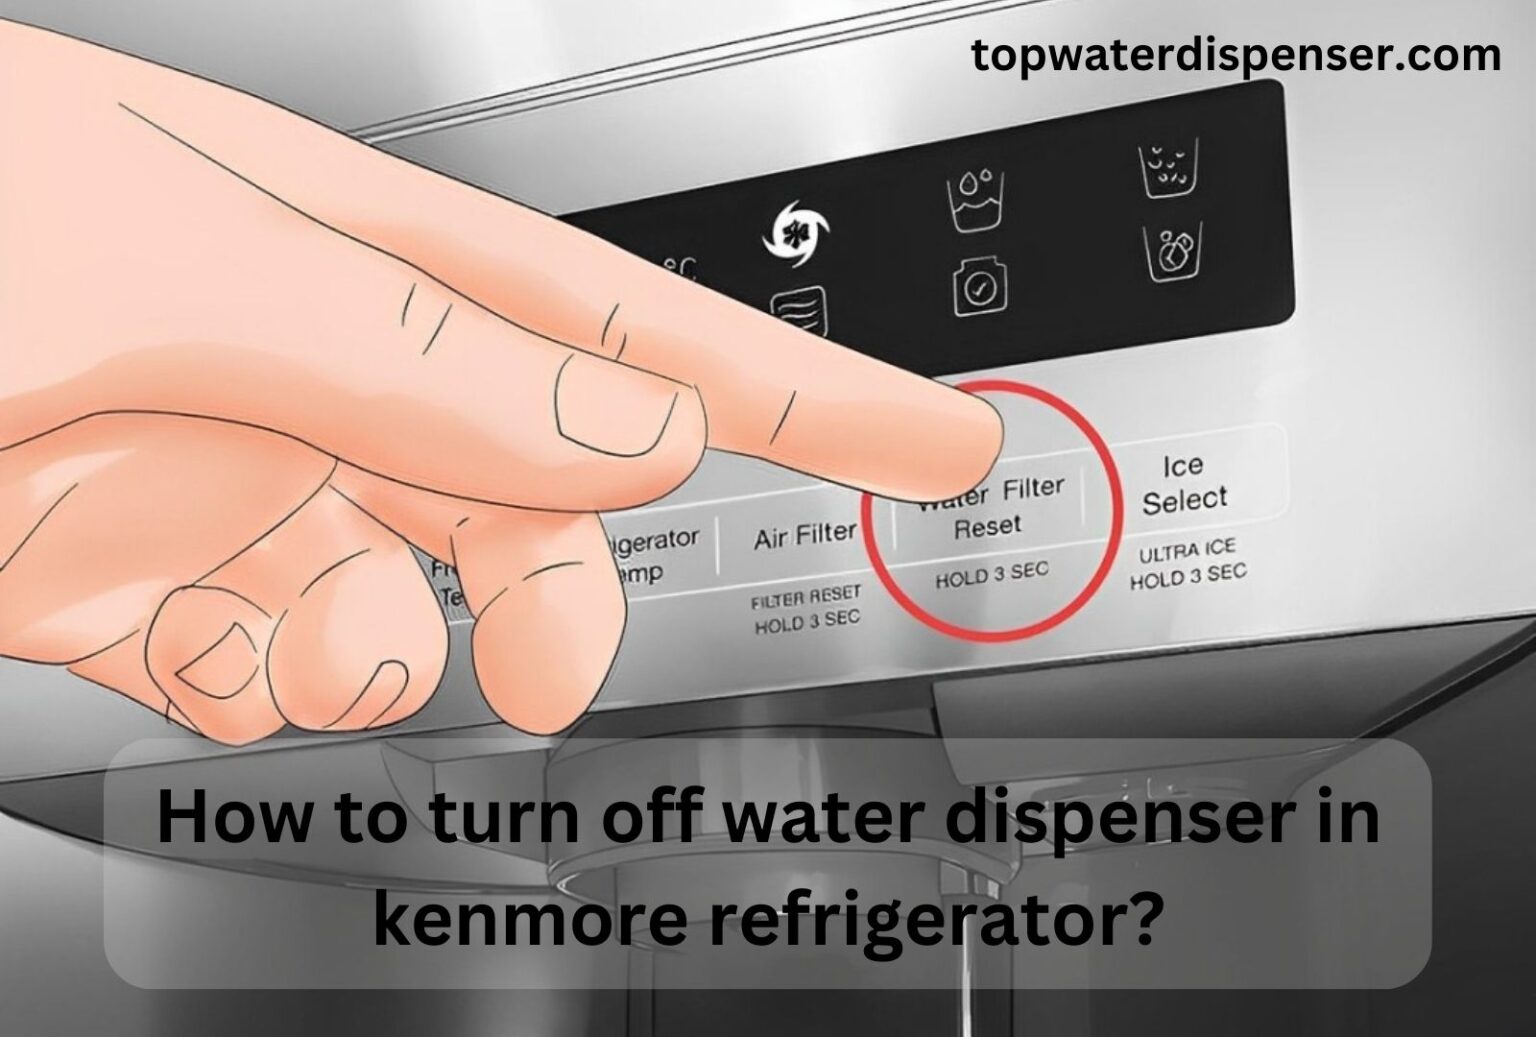 How to turn off water dispenser in kenmore refrigerator?